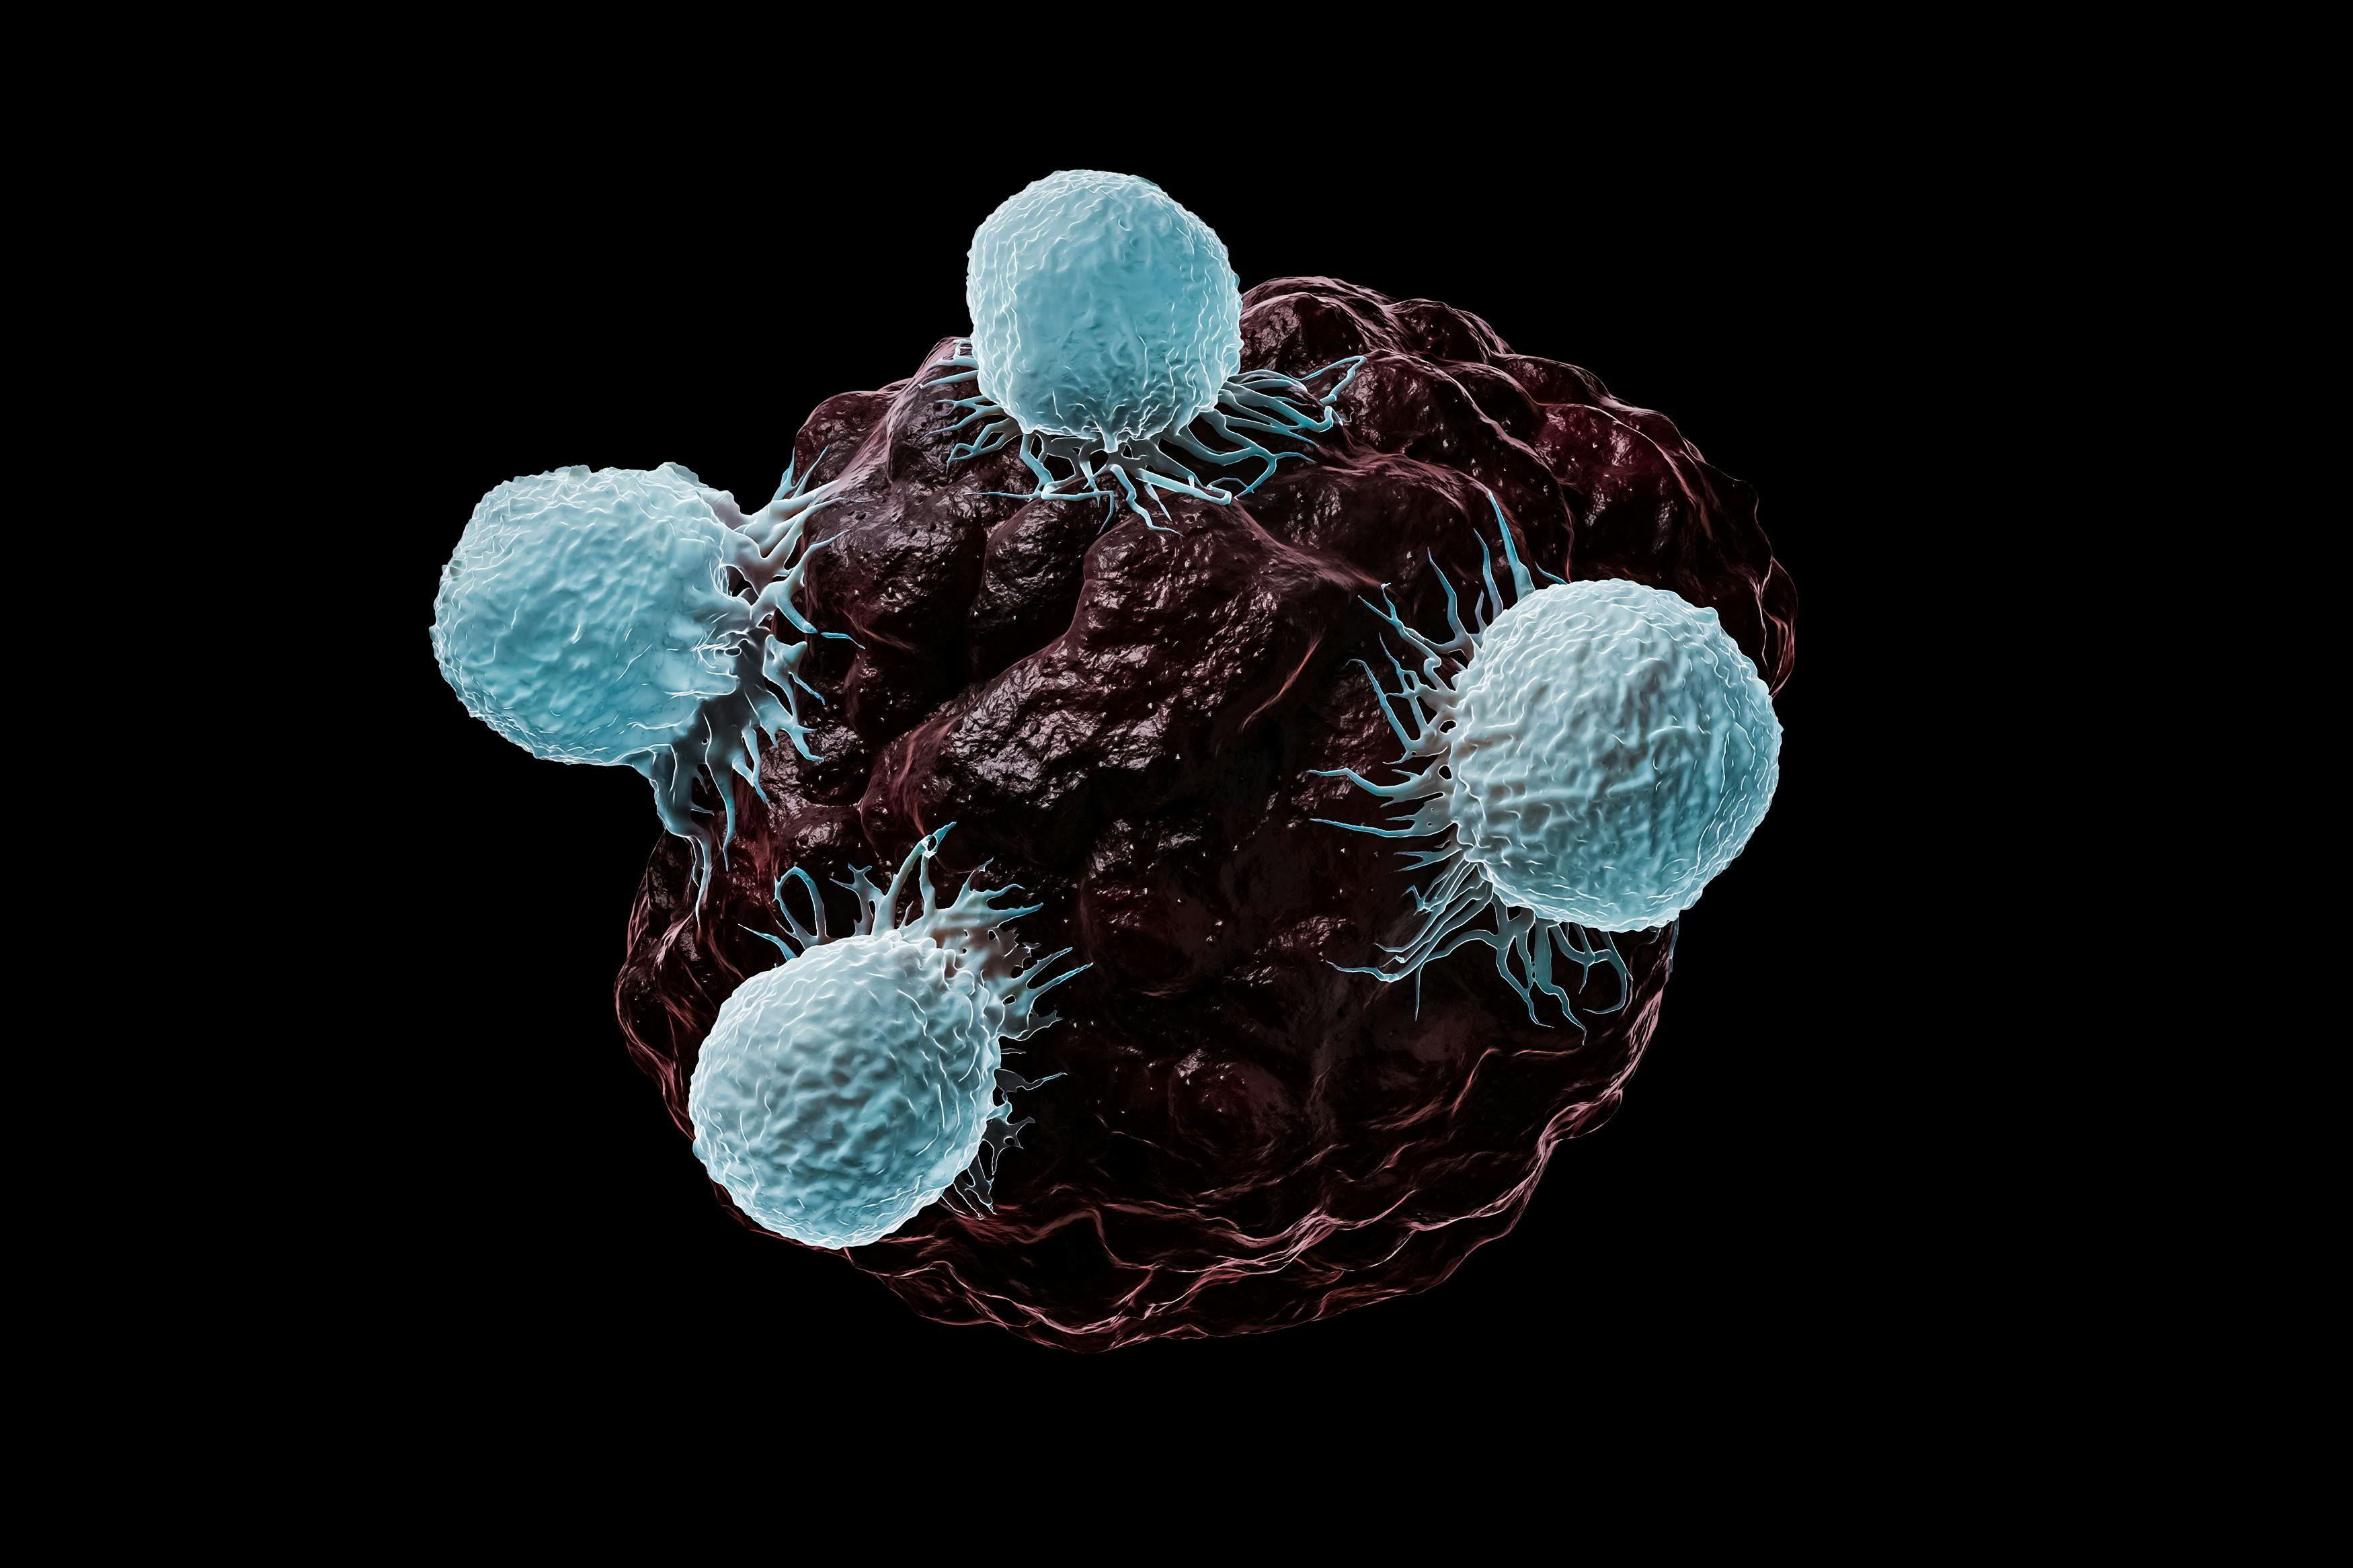 New CAR-T Technology Being Explored in Phase 1 for Solid Tumors